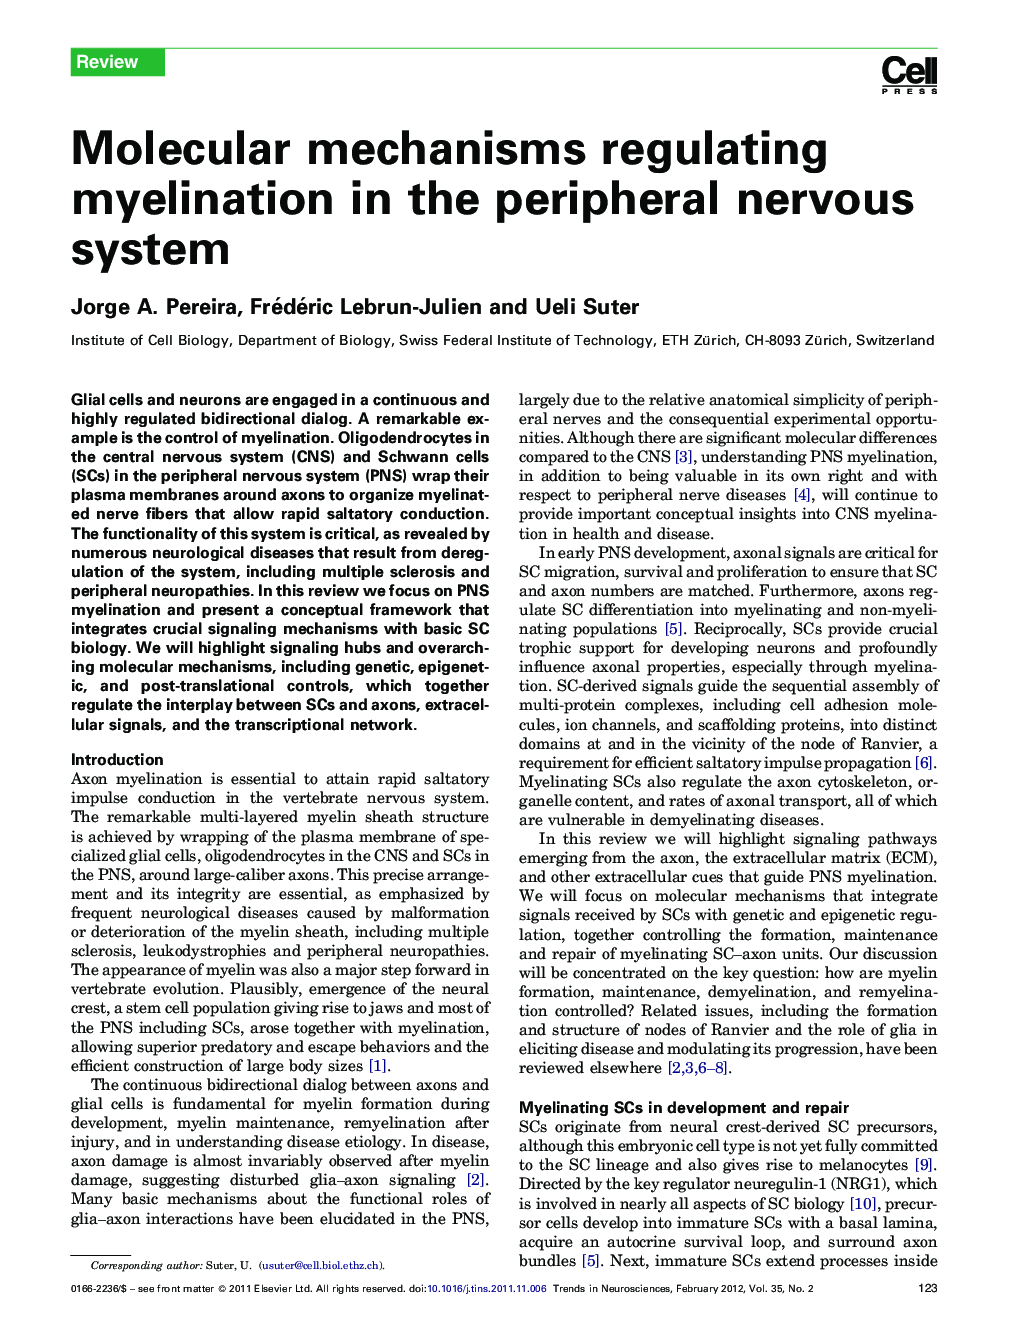 Molecular mechanisms regulating myelination in the peripheral nervous system